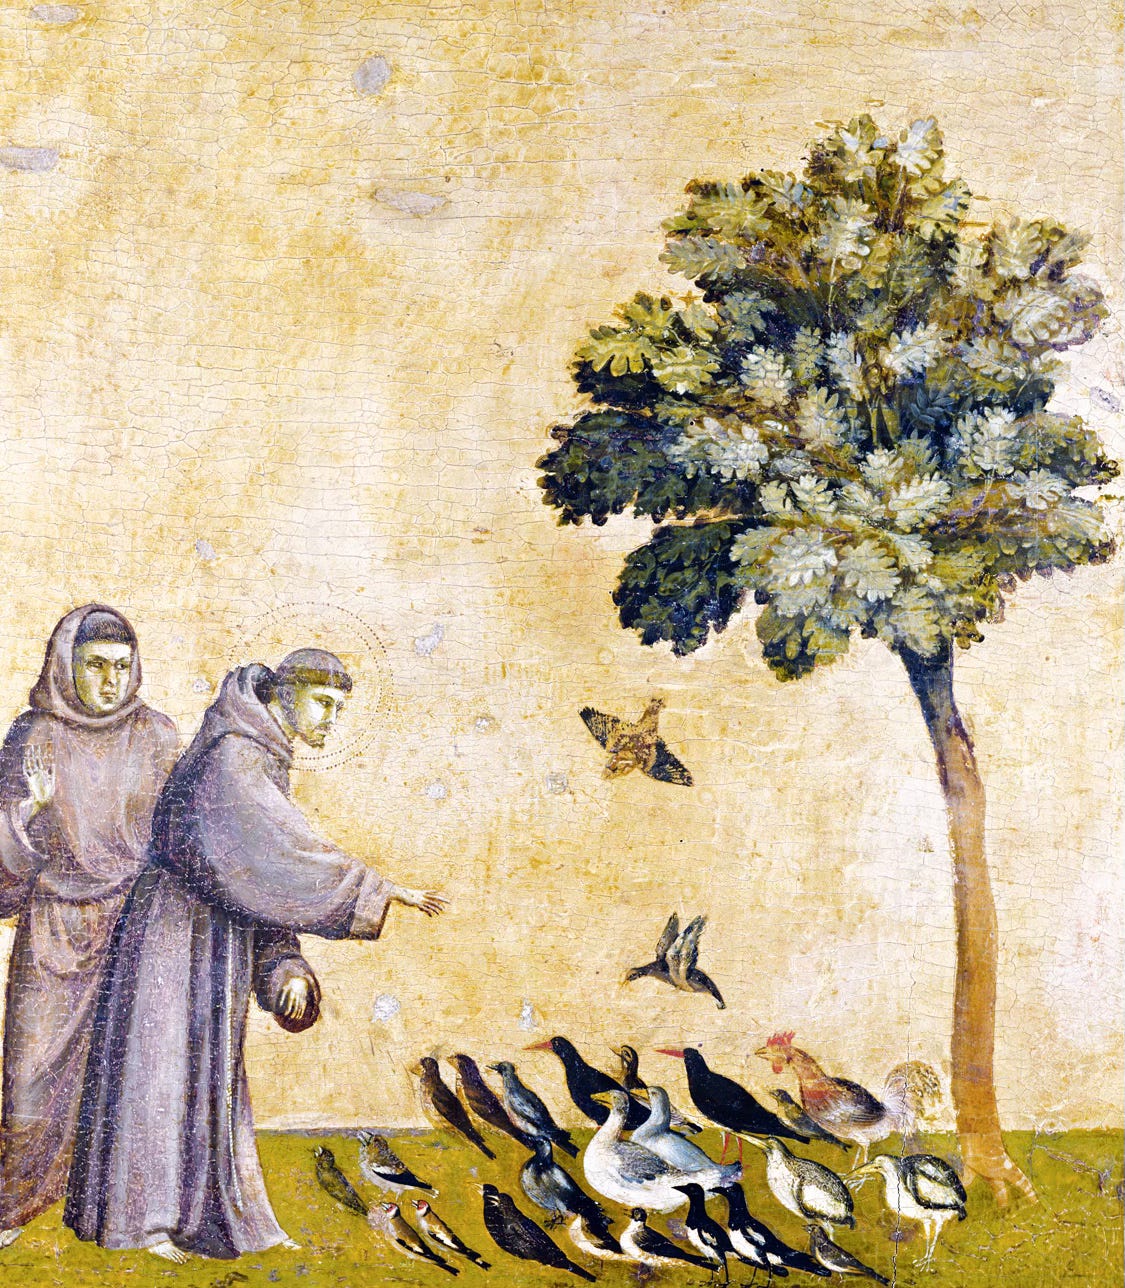 St. Francis preaching to the birds, from St. Francis Receiving the Stigmata, by Giotto di Bondone, c. 1295–1300. Louvre Museum, Paris, France. 